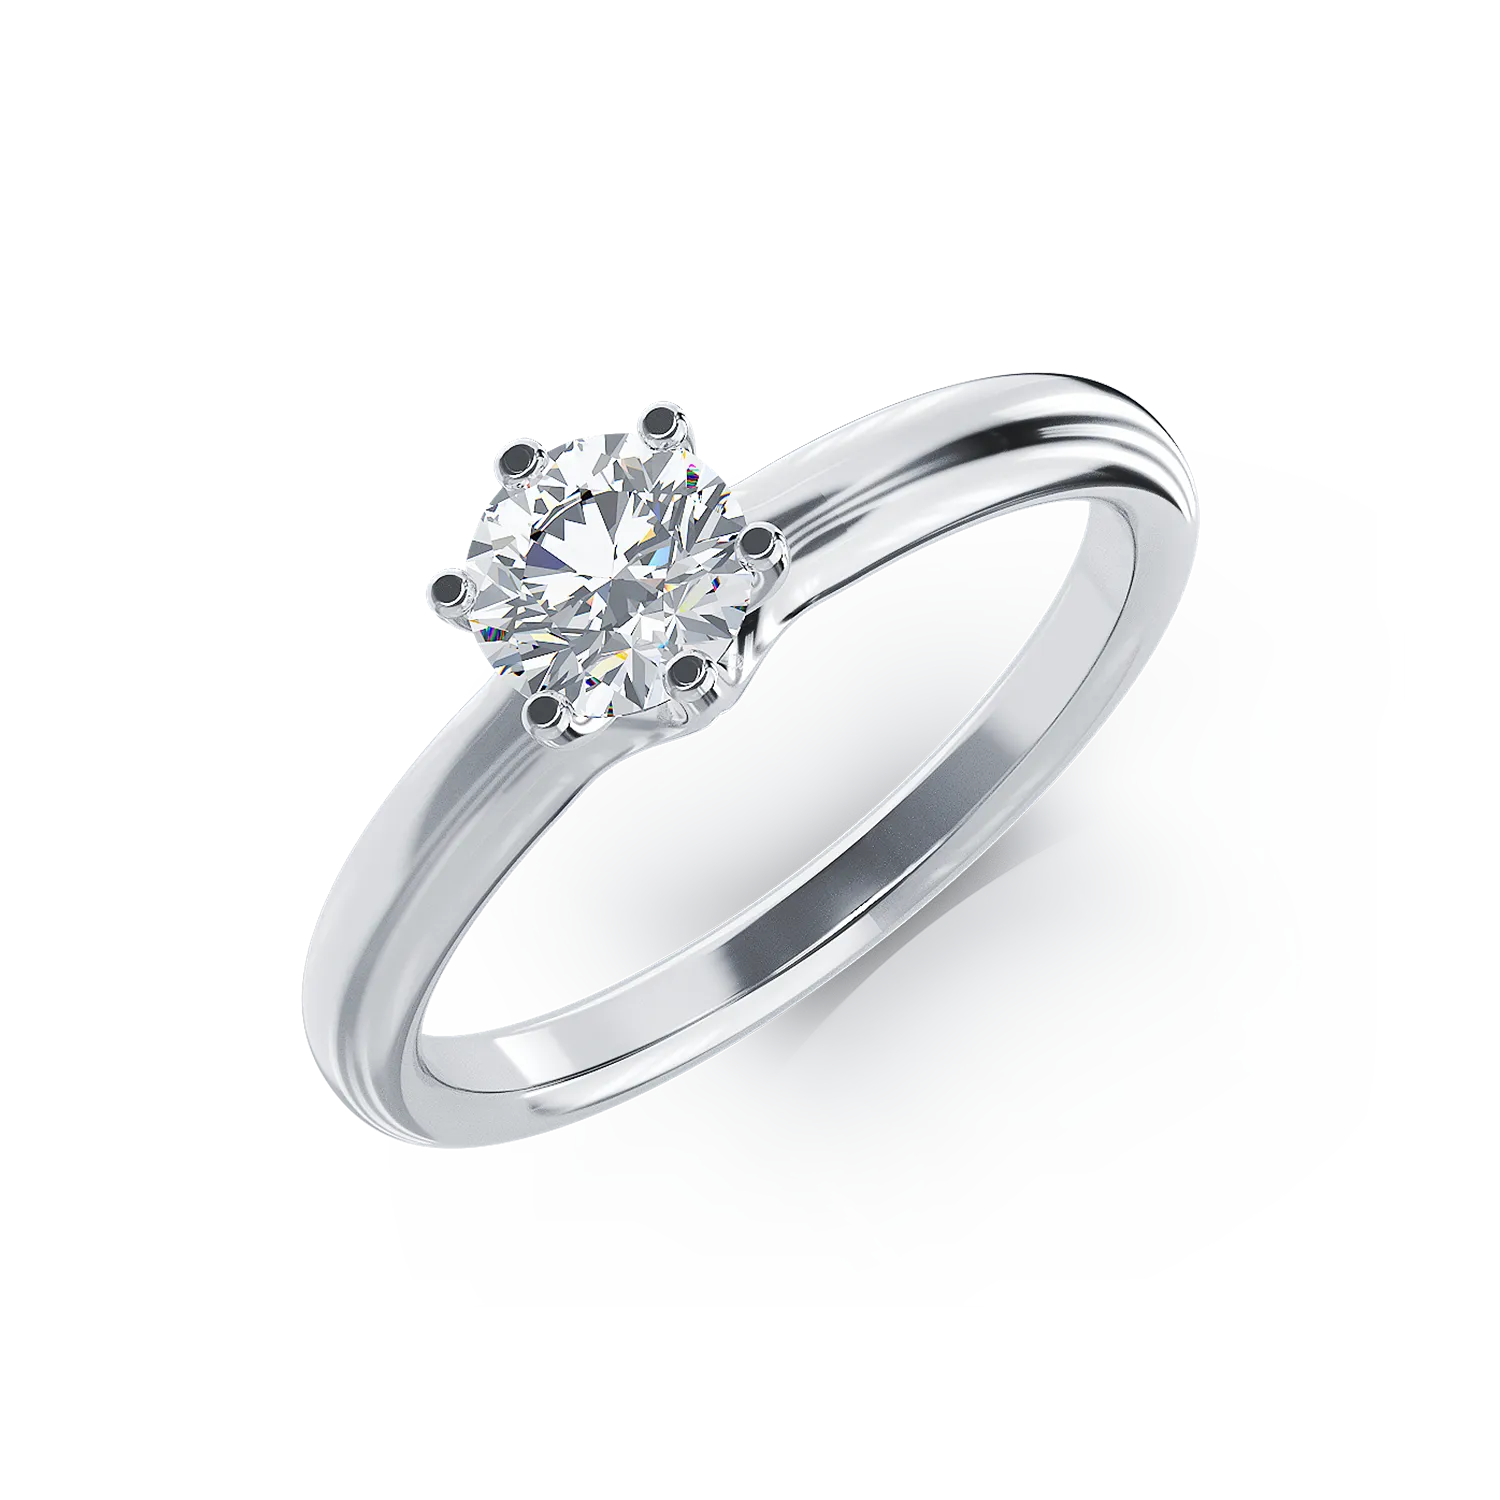 Platinum engagement ring with a 0.6ct solitaire diamond